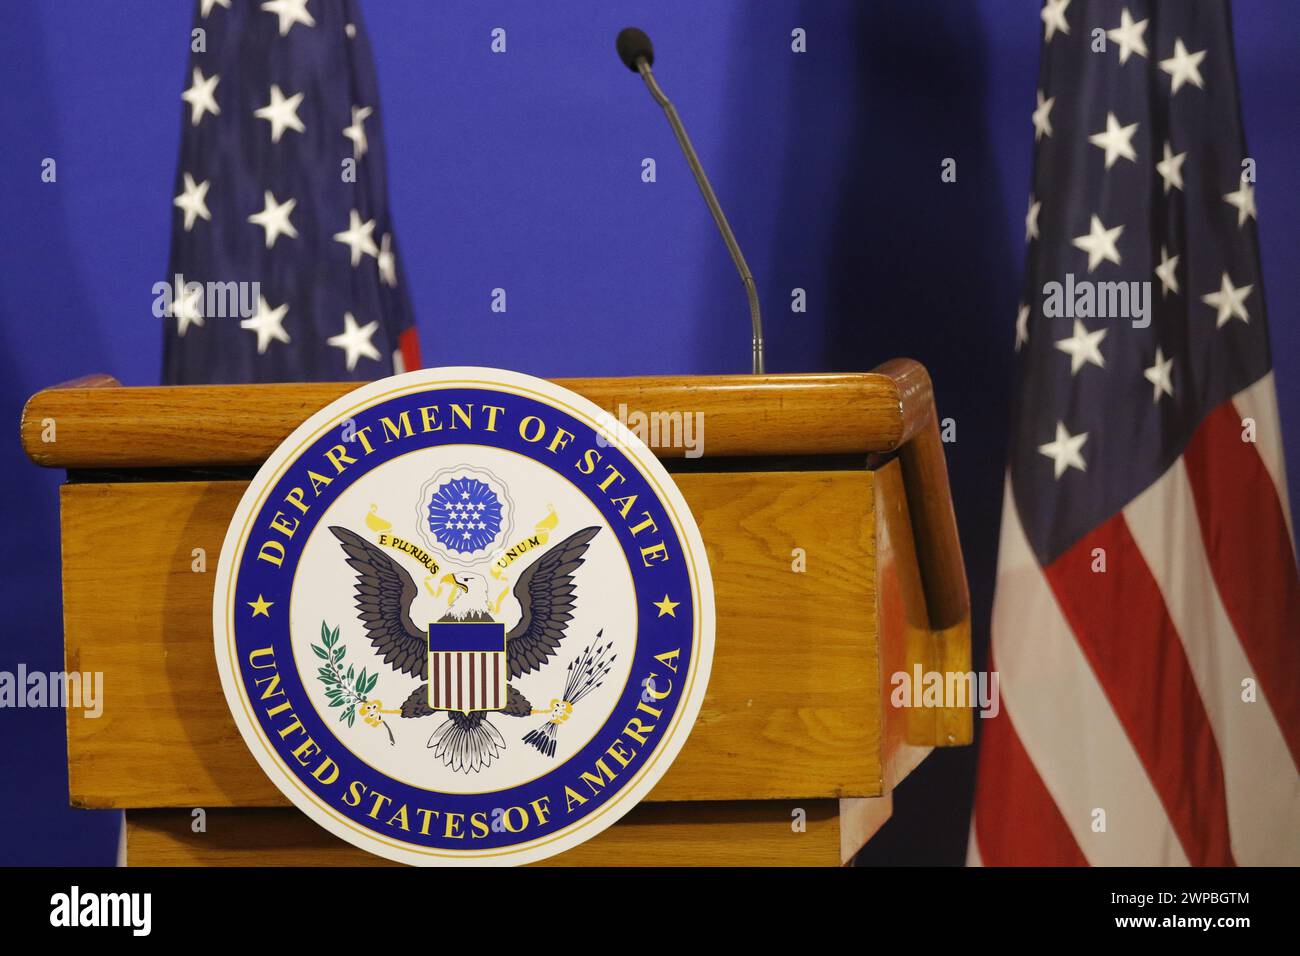 United States of America Department of State logo and flag on stage for press conference announcement - Rio de Janeiro, Brazil 02.22.2024 Stock Photo